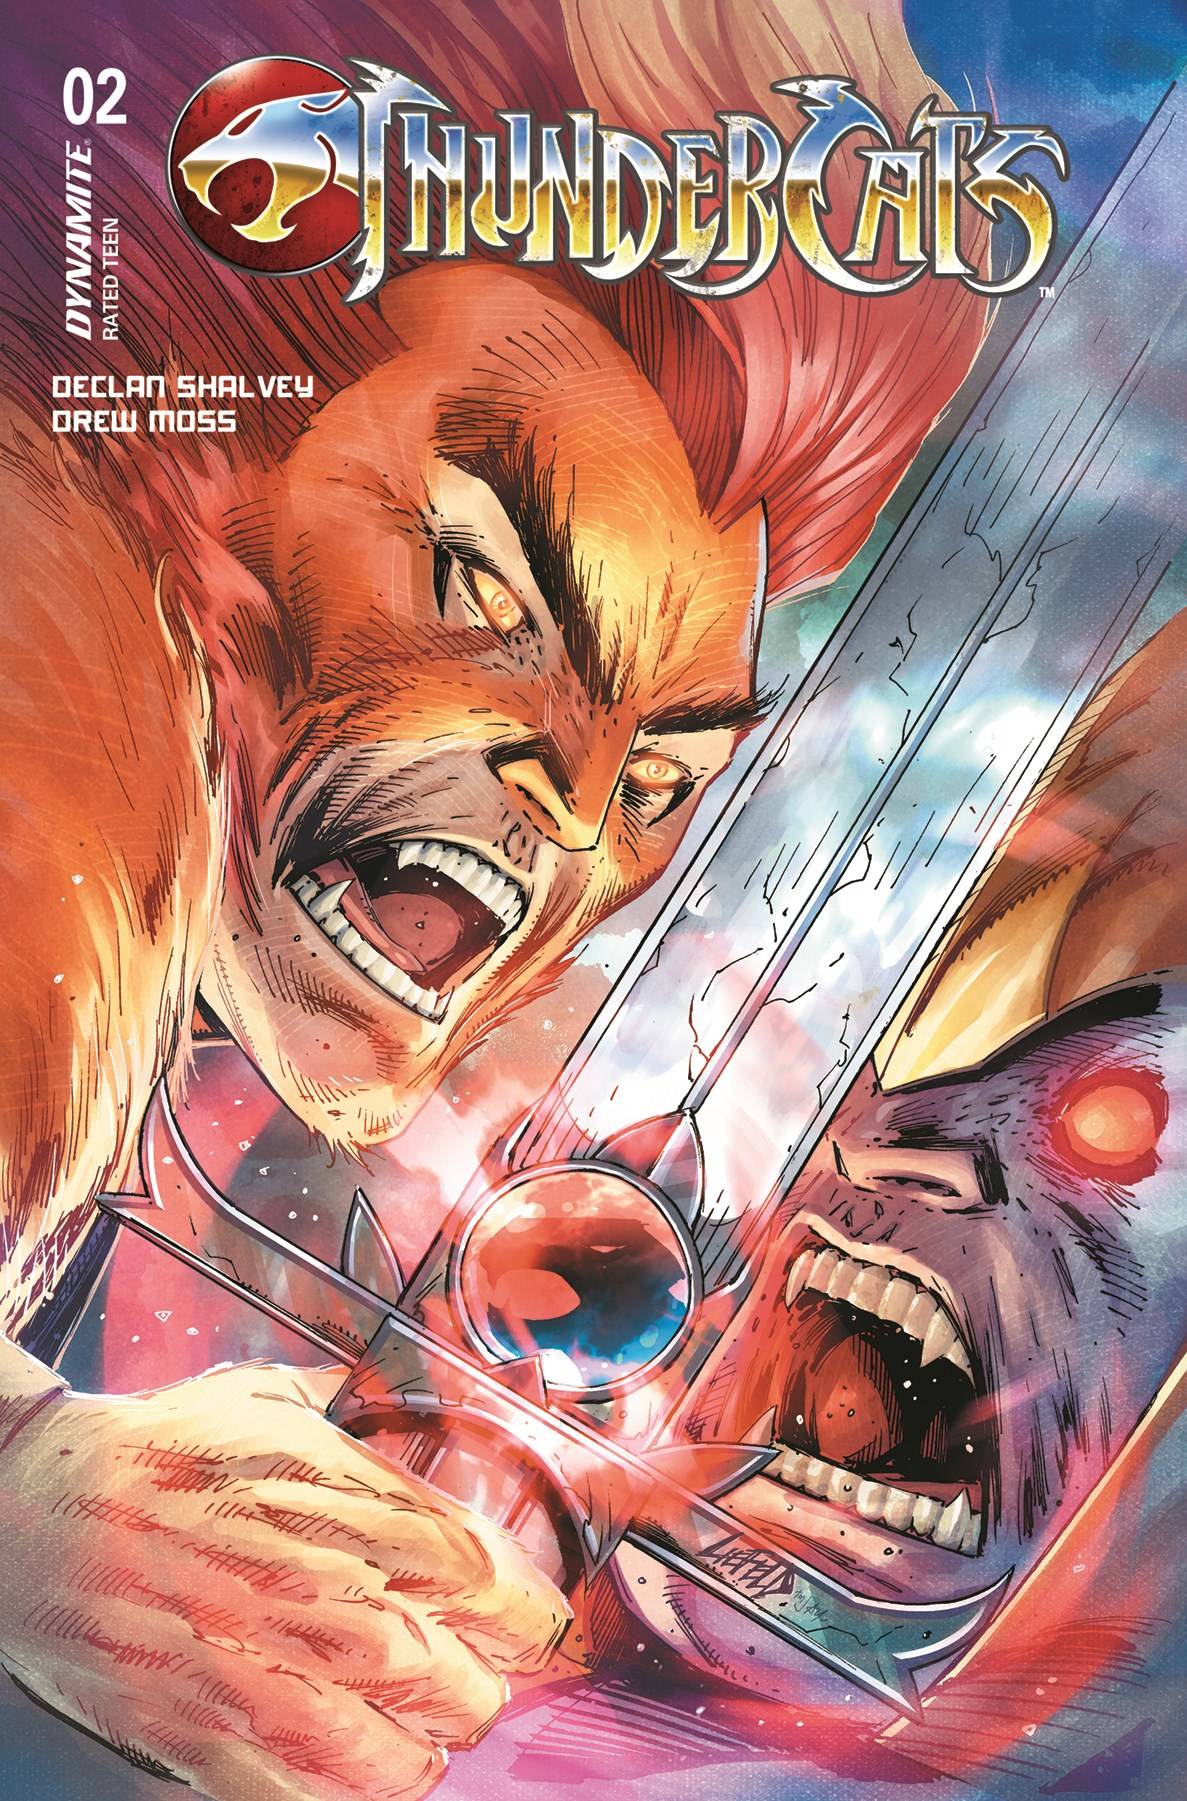 Thundercats #2 Rob Liefeld Original Variant Cover W